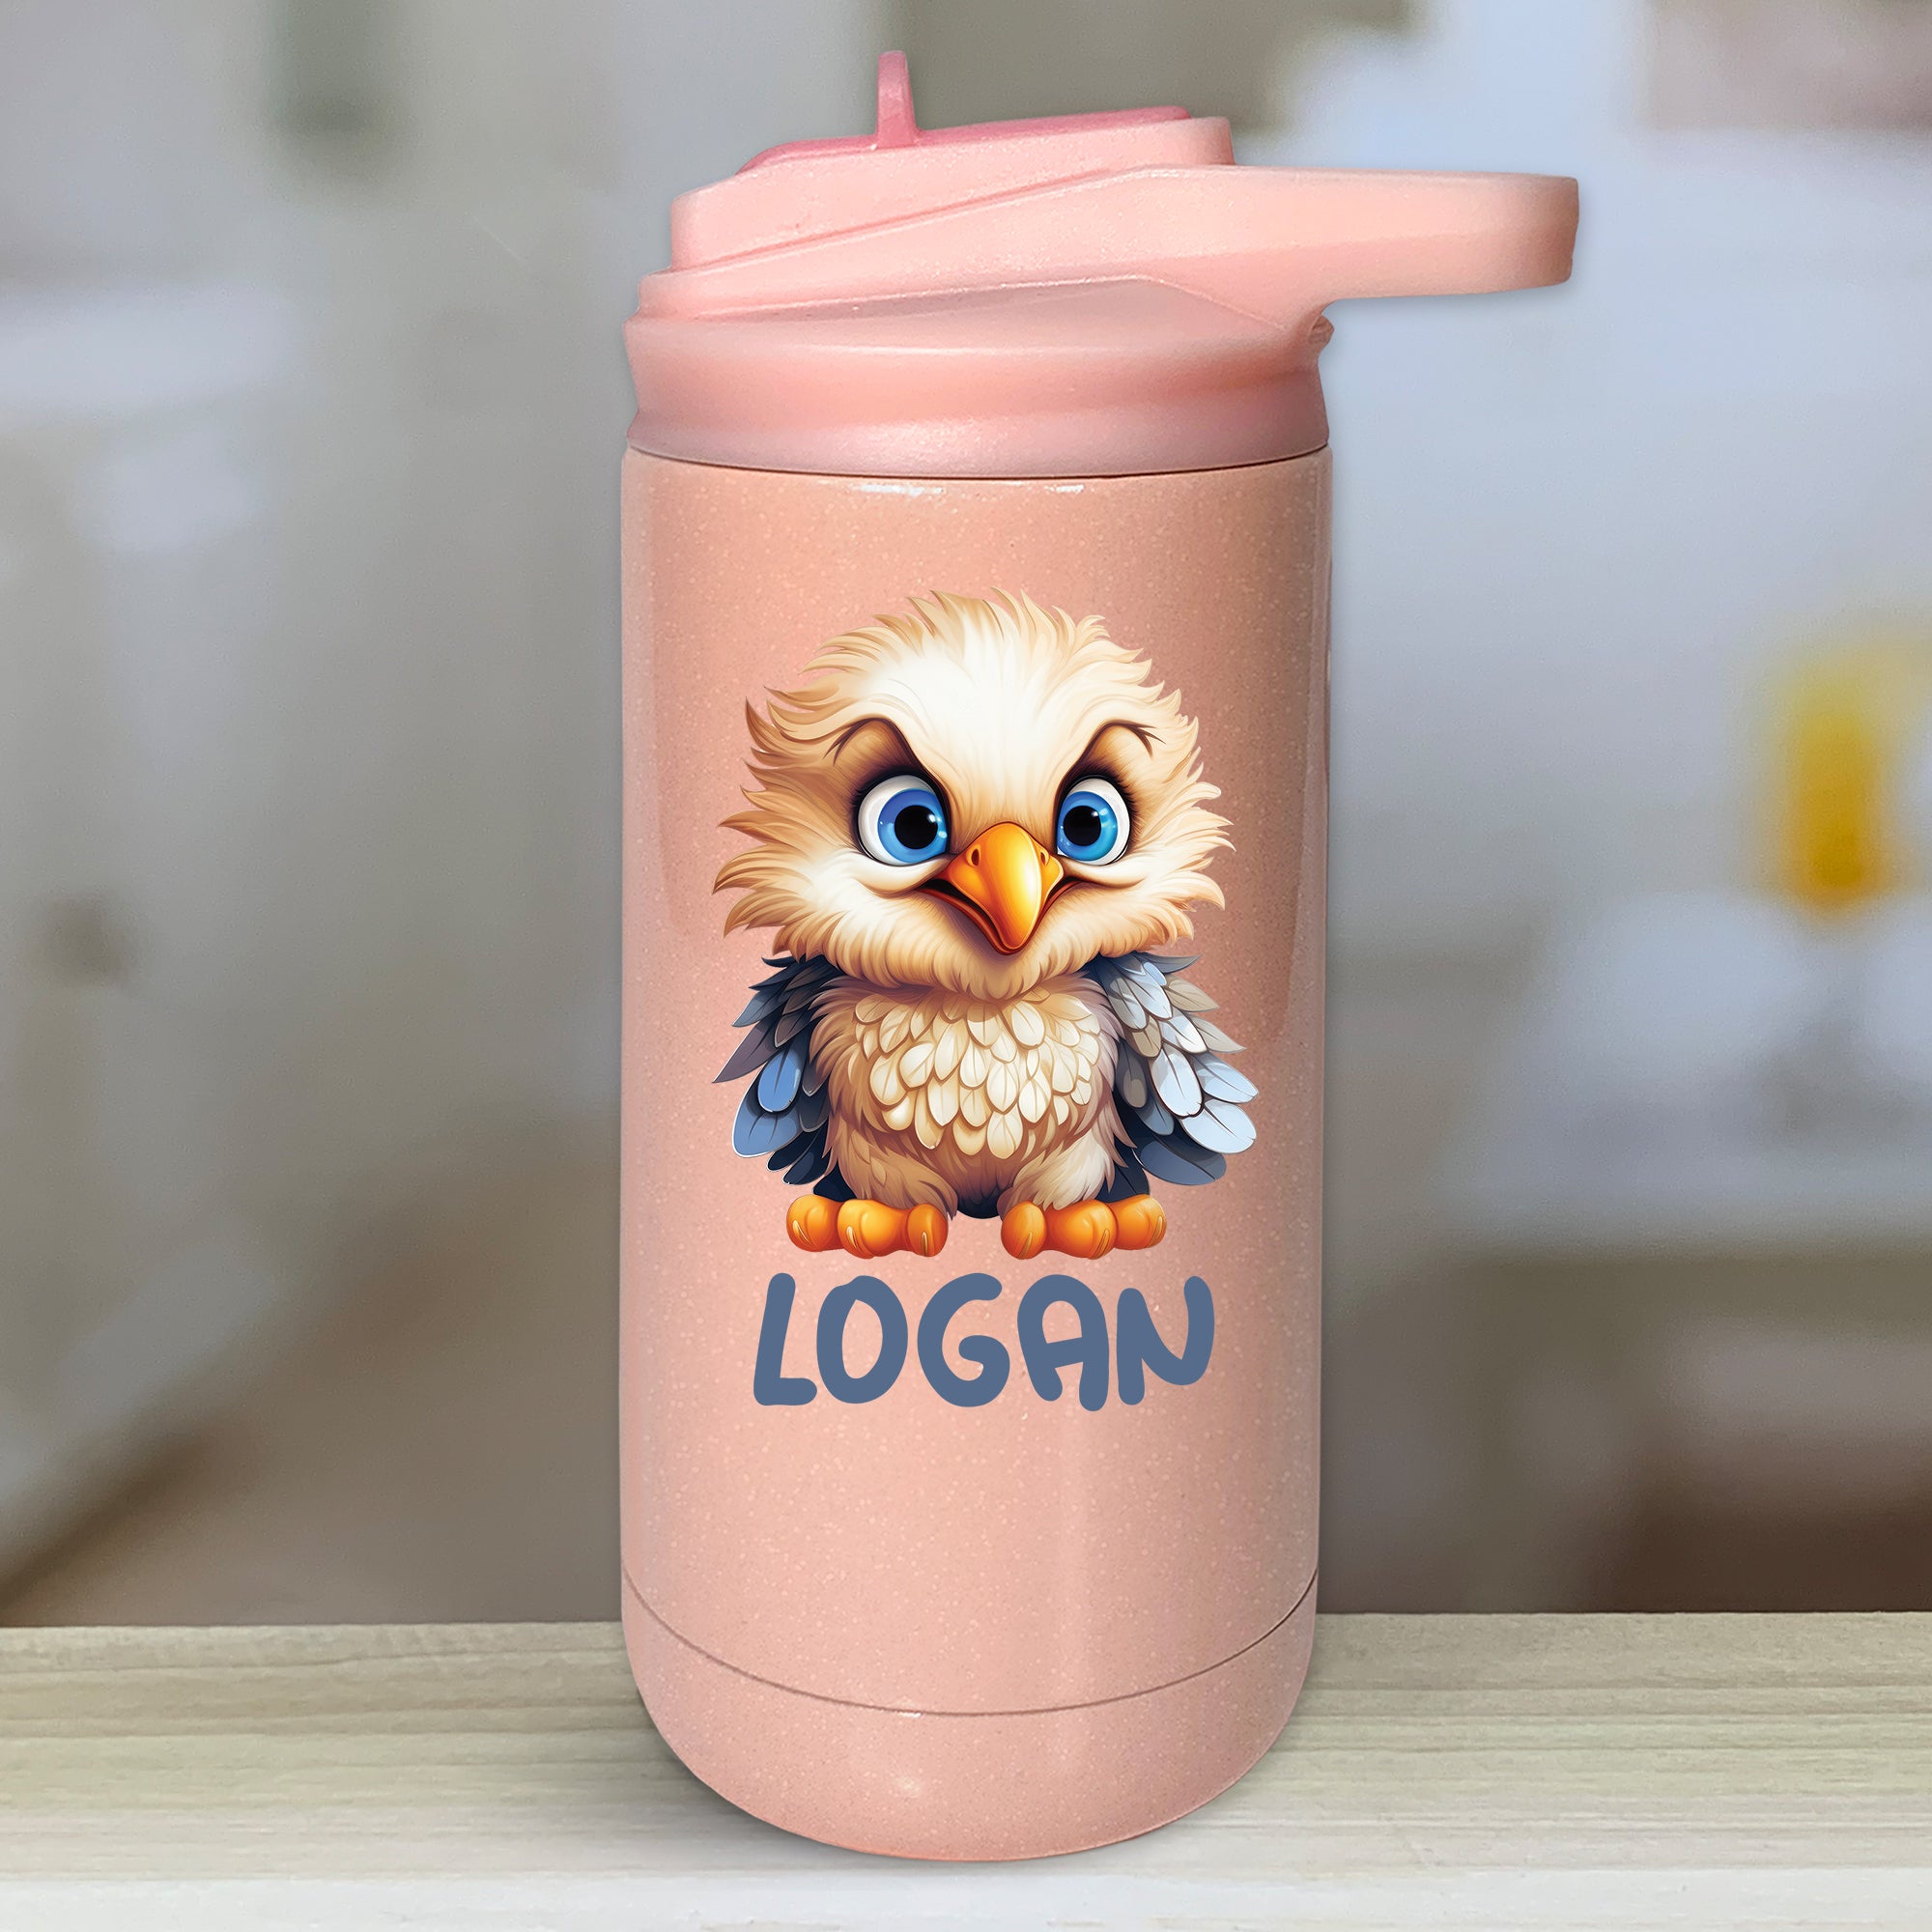 Baby Birds Personalized With Name Kids Water Bottle Tumblers